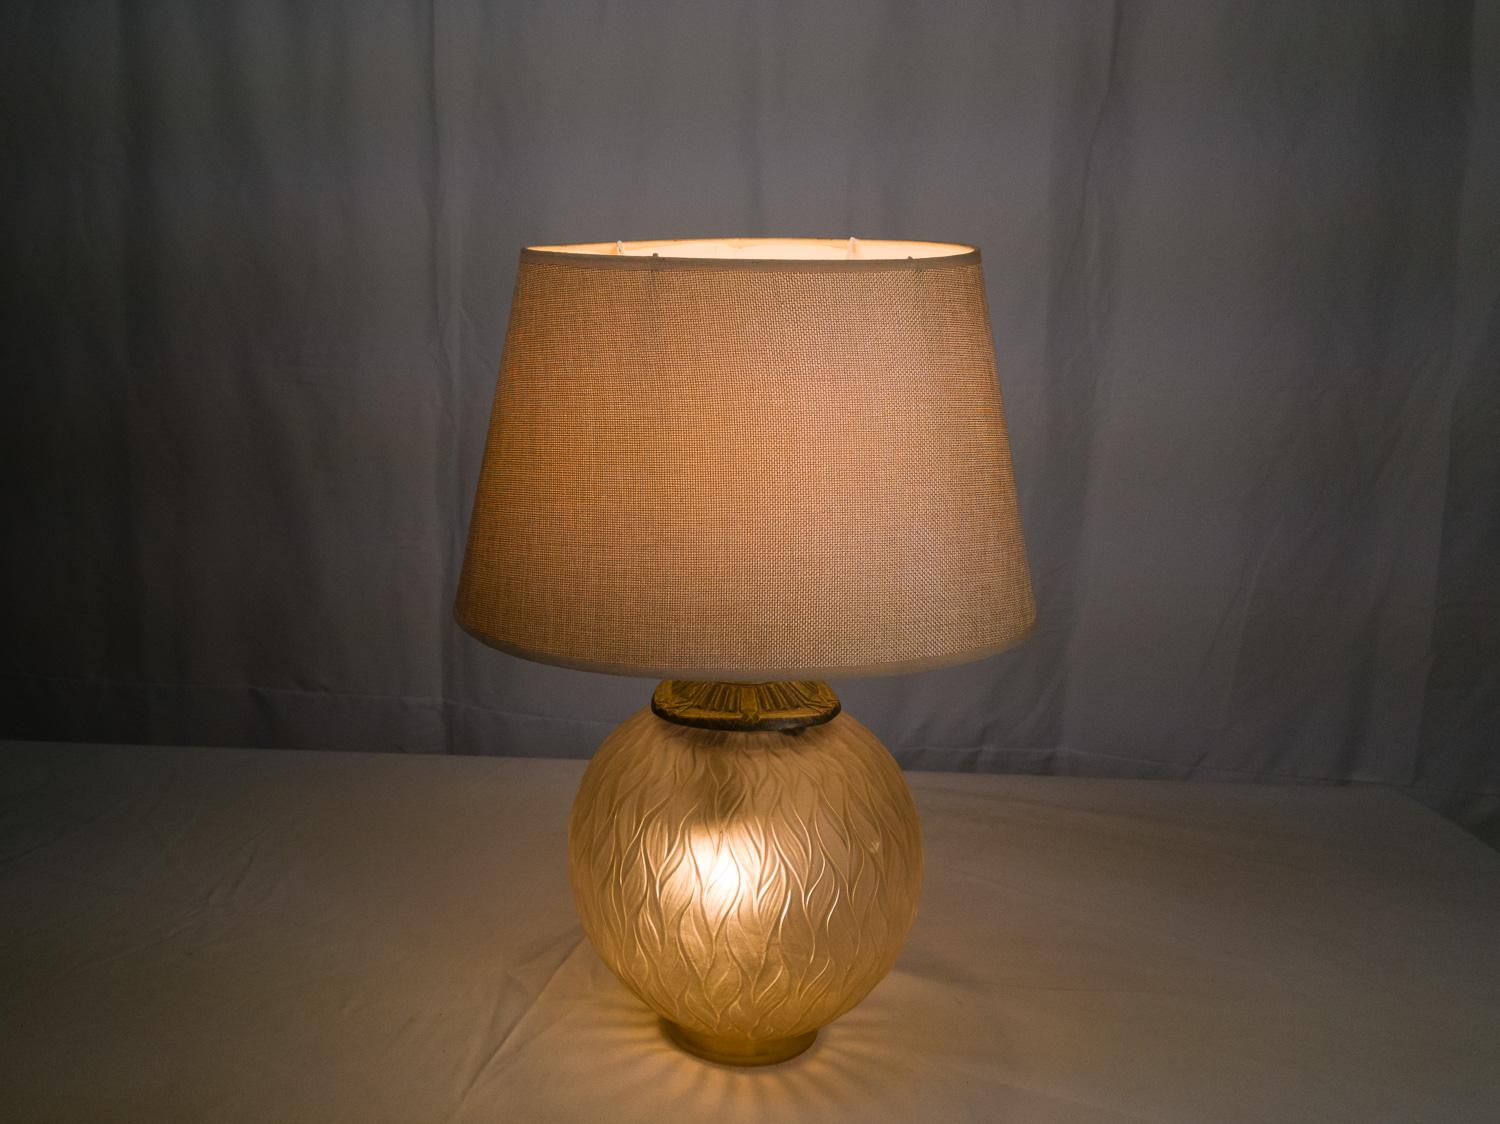 French Art Deco glass Table Lamp Genet & Michon, 1930 For Sale